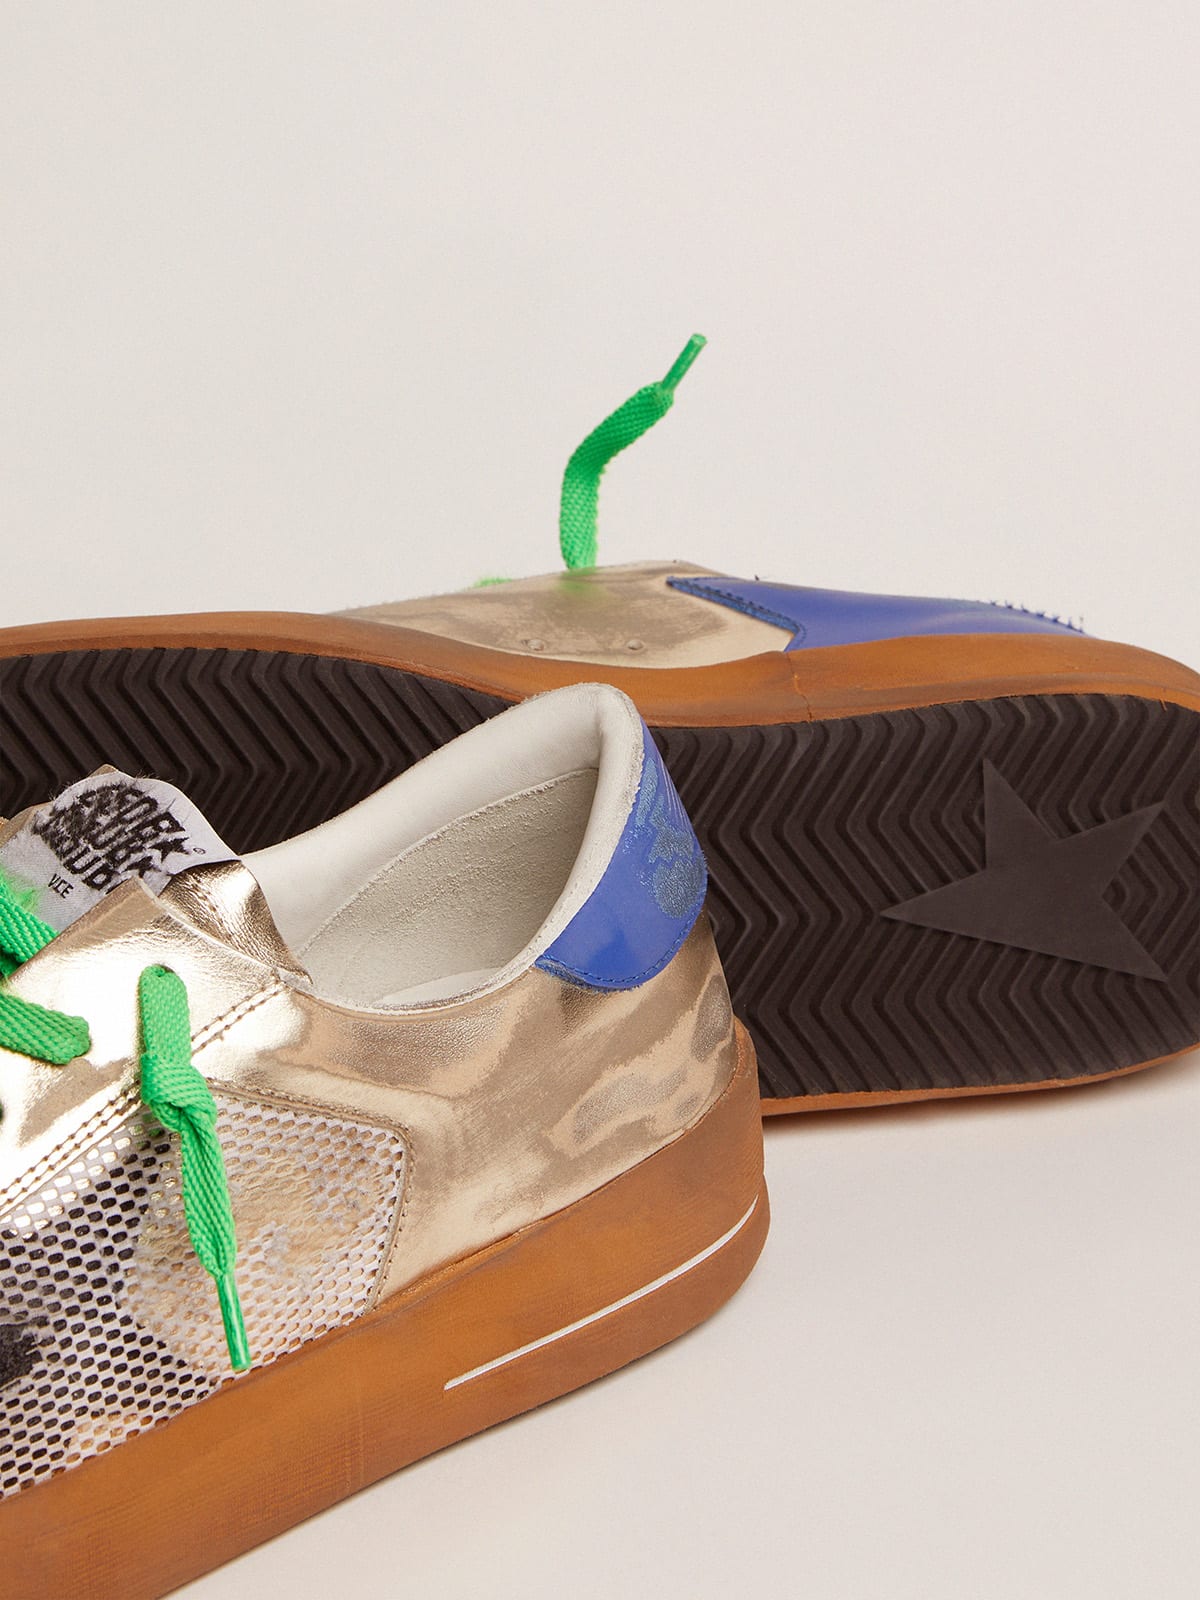 Golden Goose - Men’s Stardan LAB sneakers in laminated leather and mesh with a blue heel tab in 